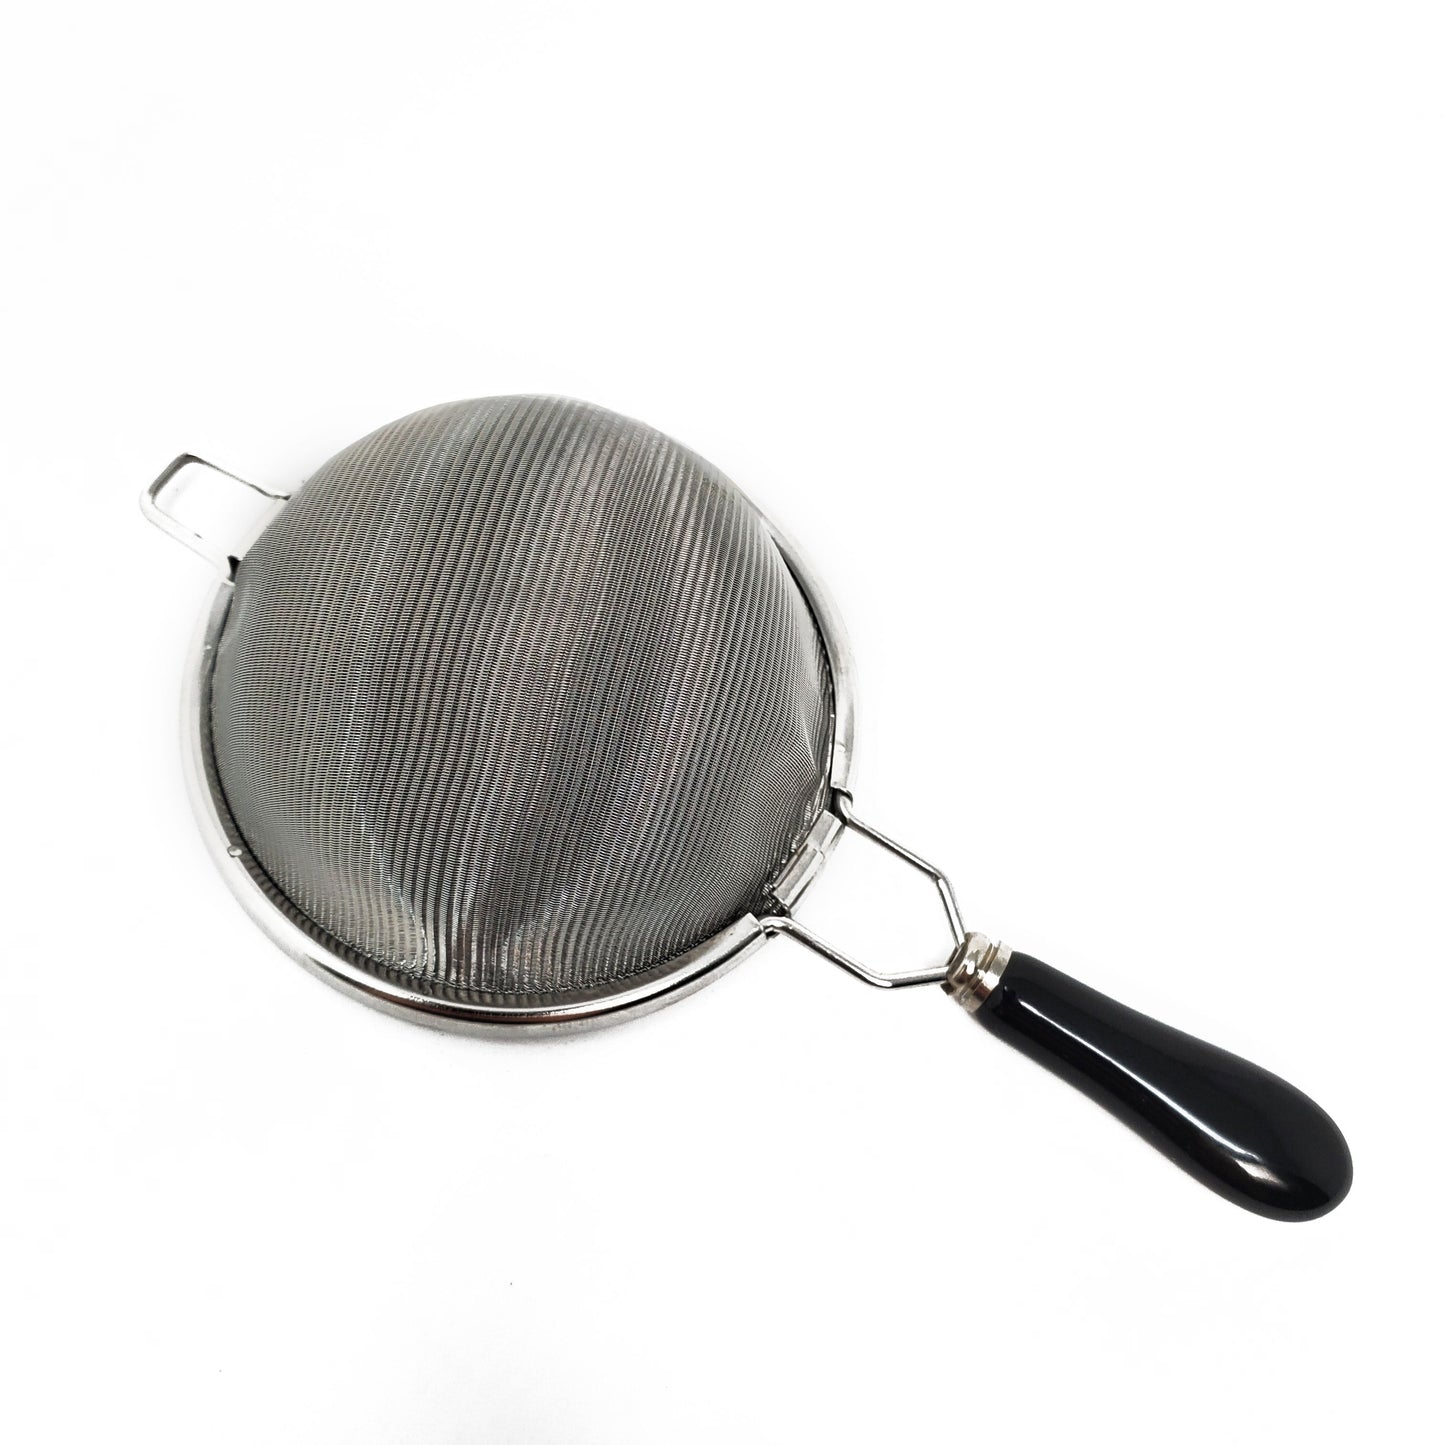 Superfine Gongfu Tea Strainer by Tea and Whisk - Lotus and Willow